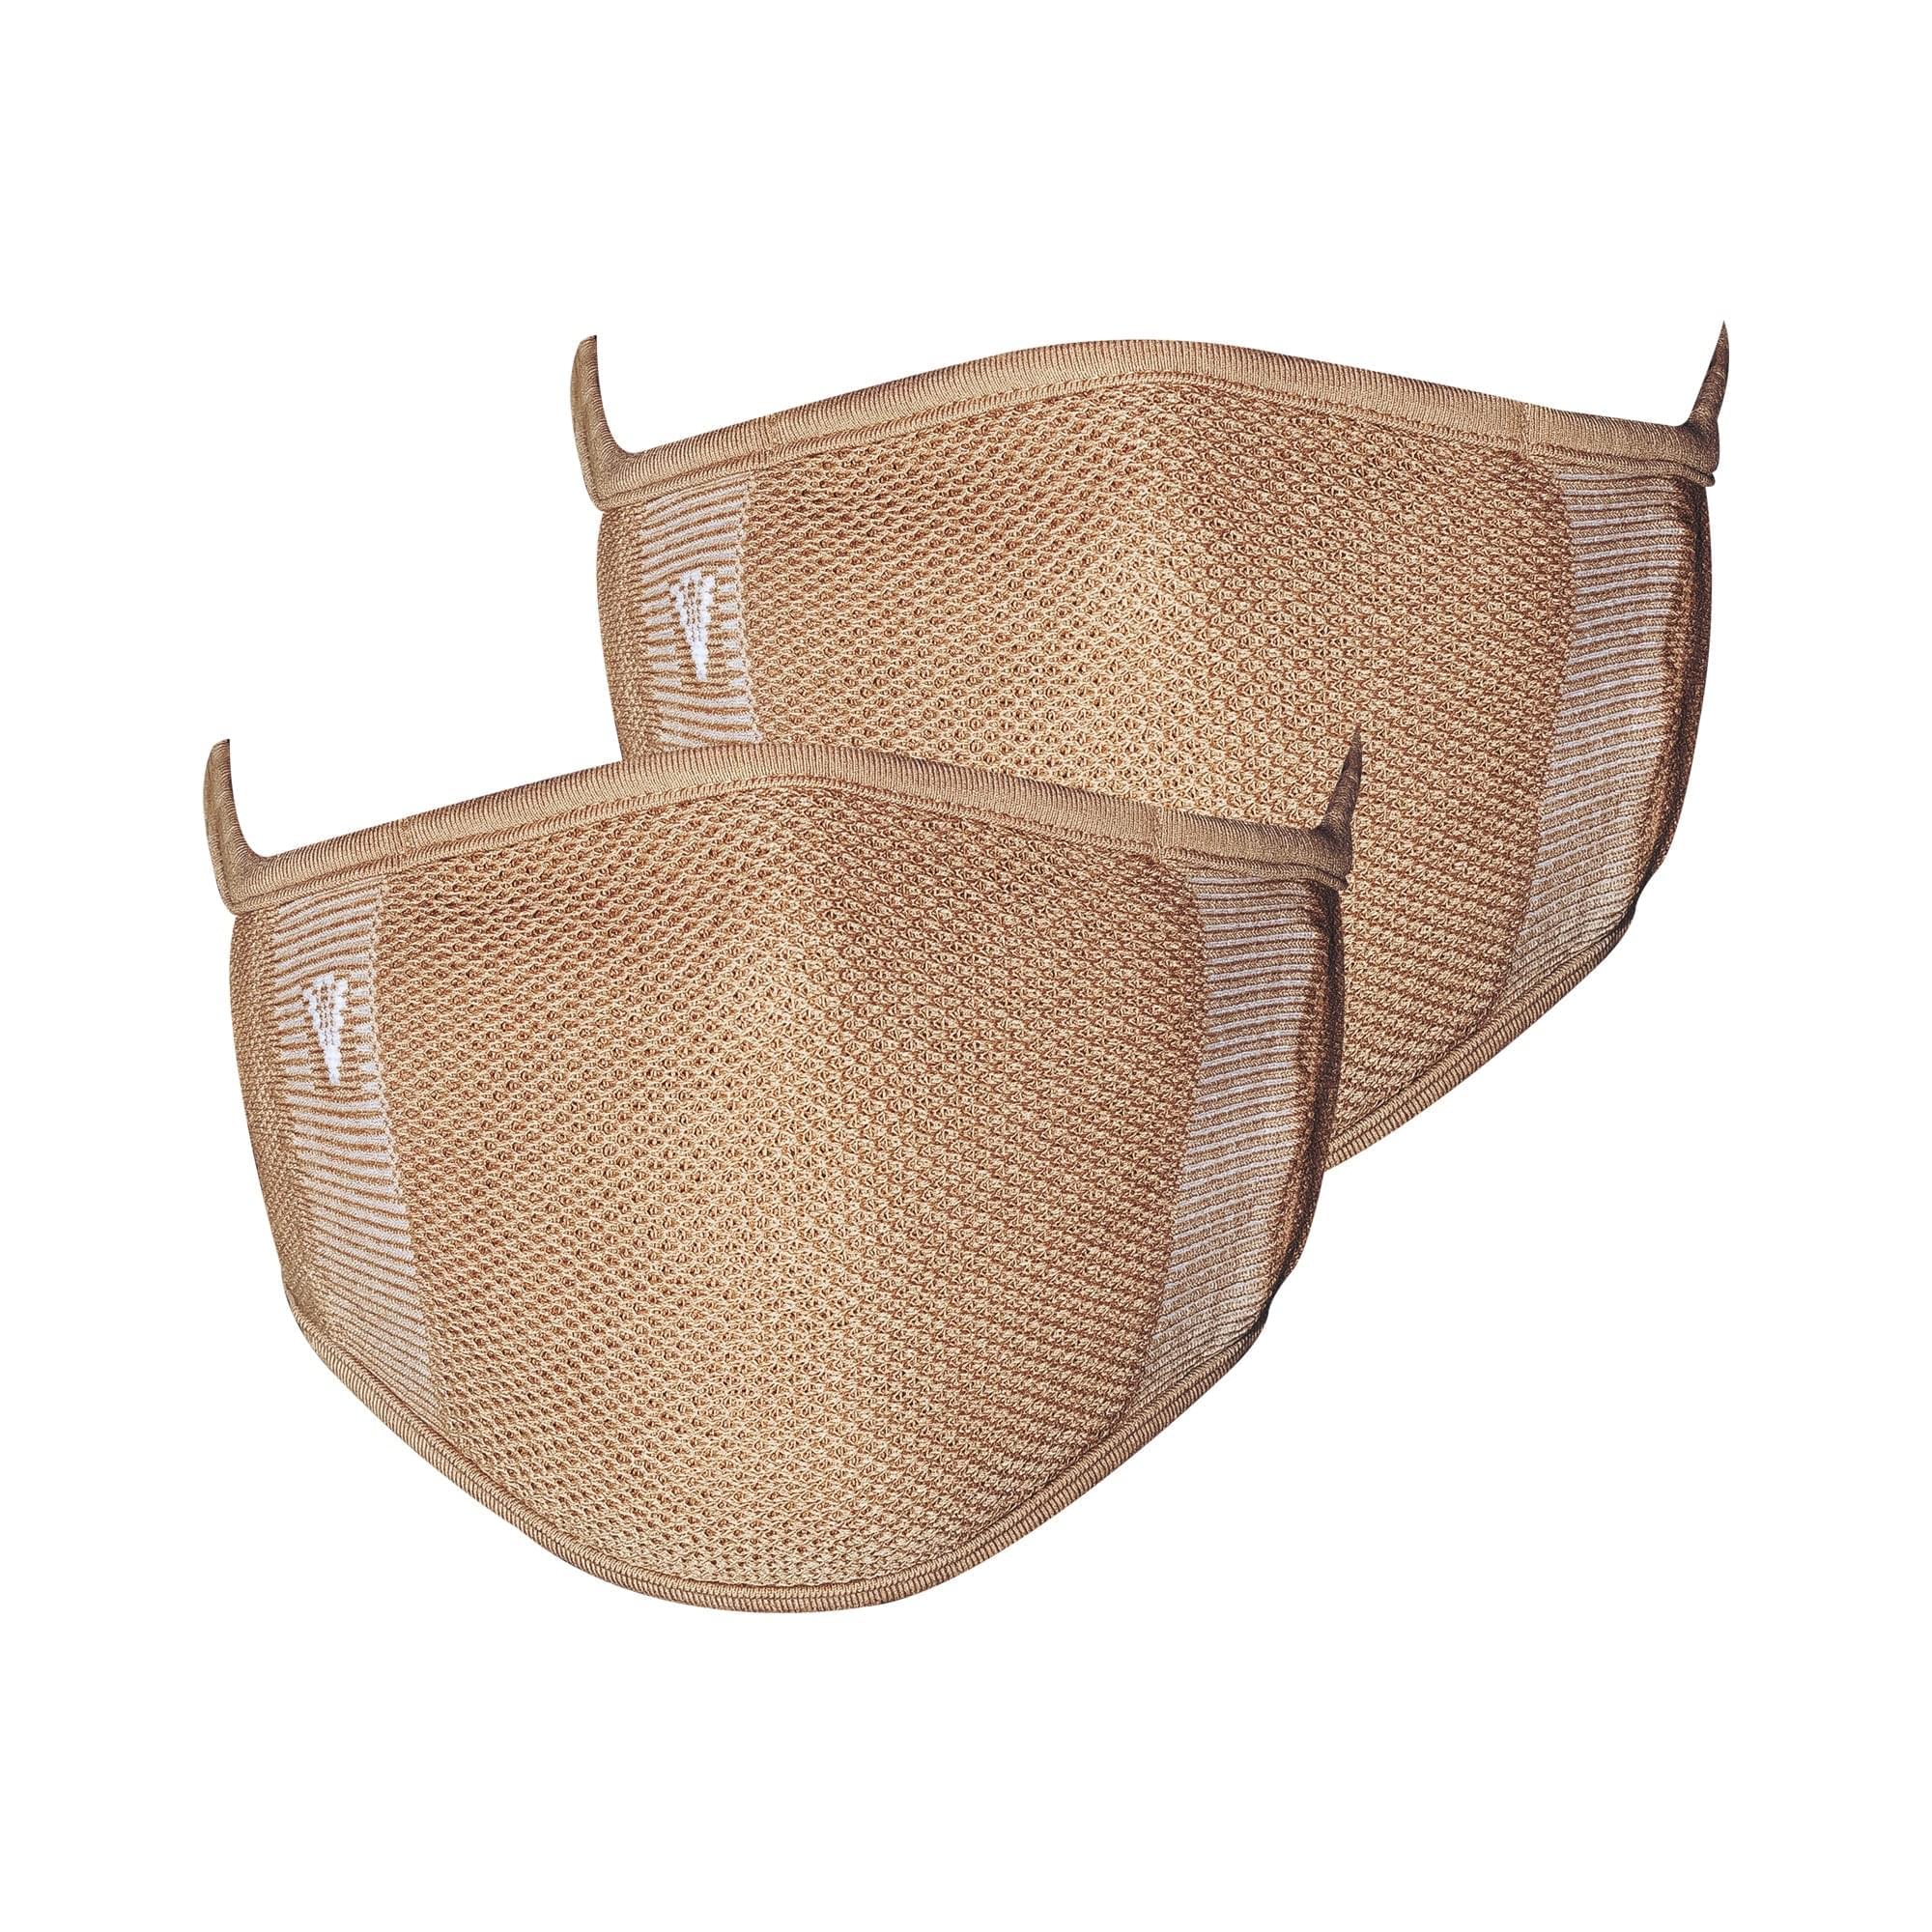 4-Layer Anti-Bacterial Protection Mask for Adults (Unisex) - Pack of 2